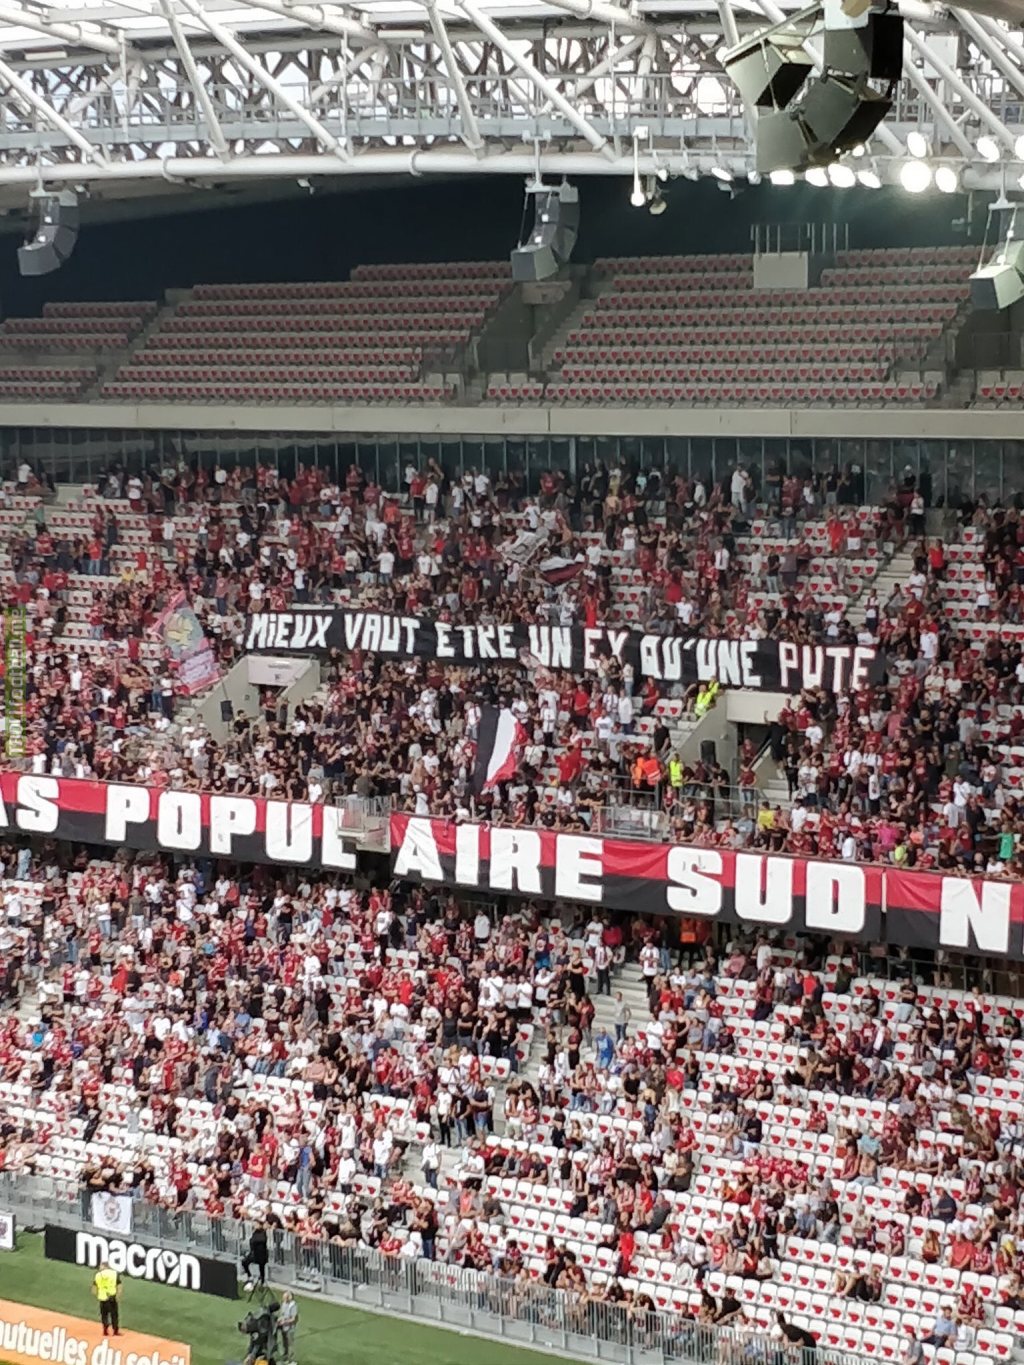 OGC Nice ultras banner criticising Hatem Ben Arfa for choosing not to return to the club he described as an “ex-girlfriend”: “Better to be an ex than a Whore*.”